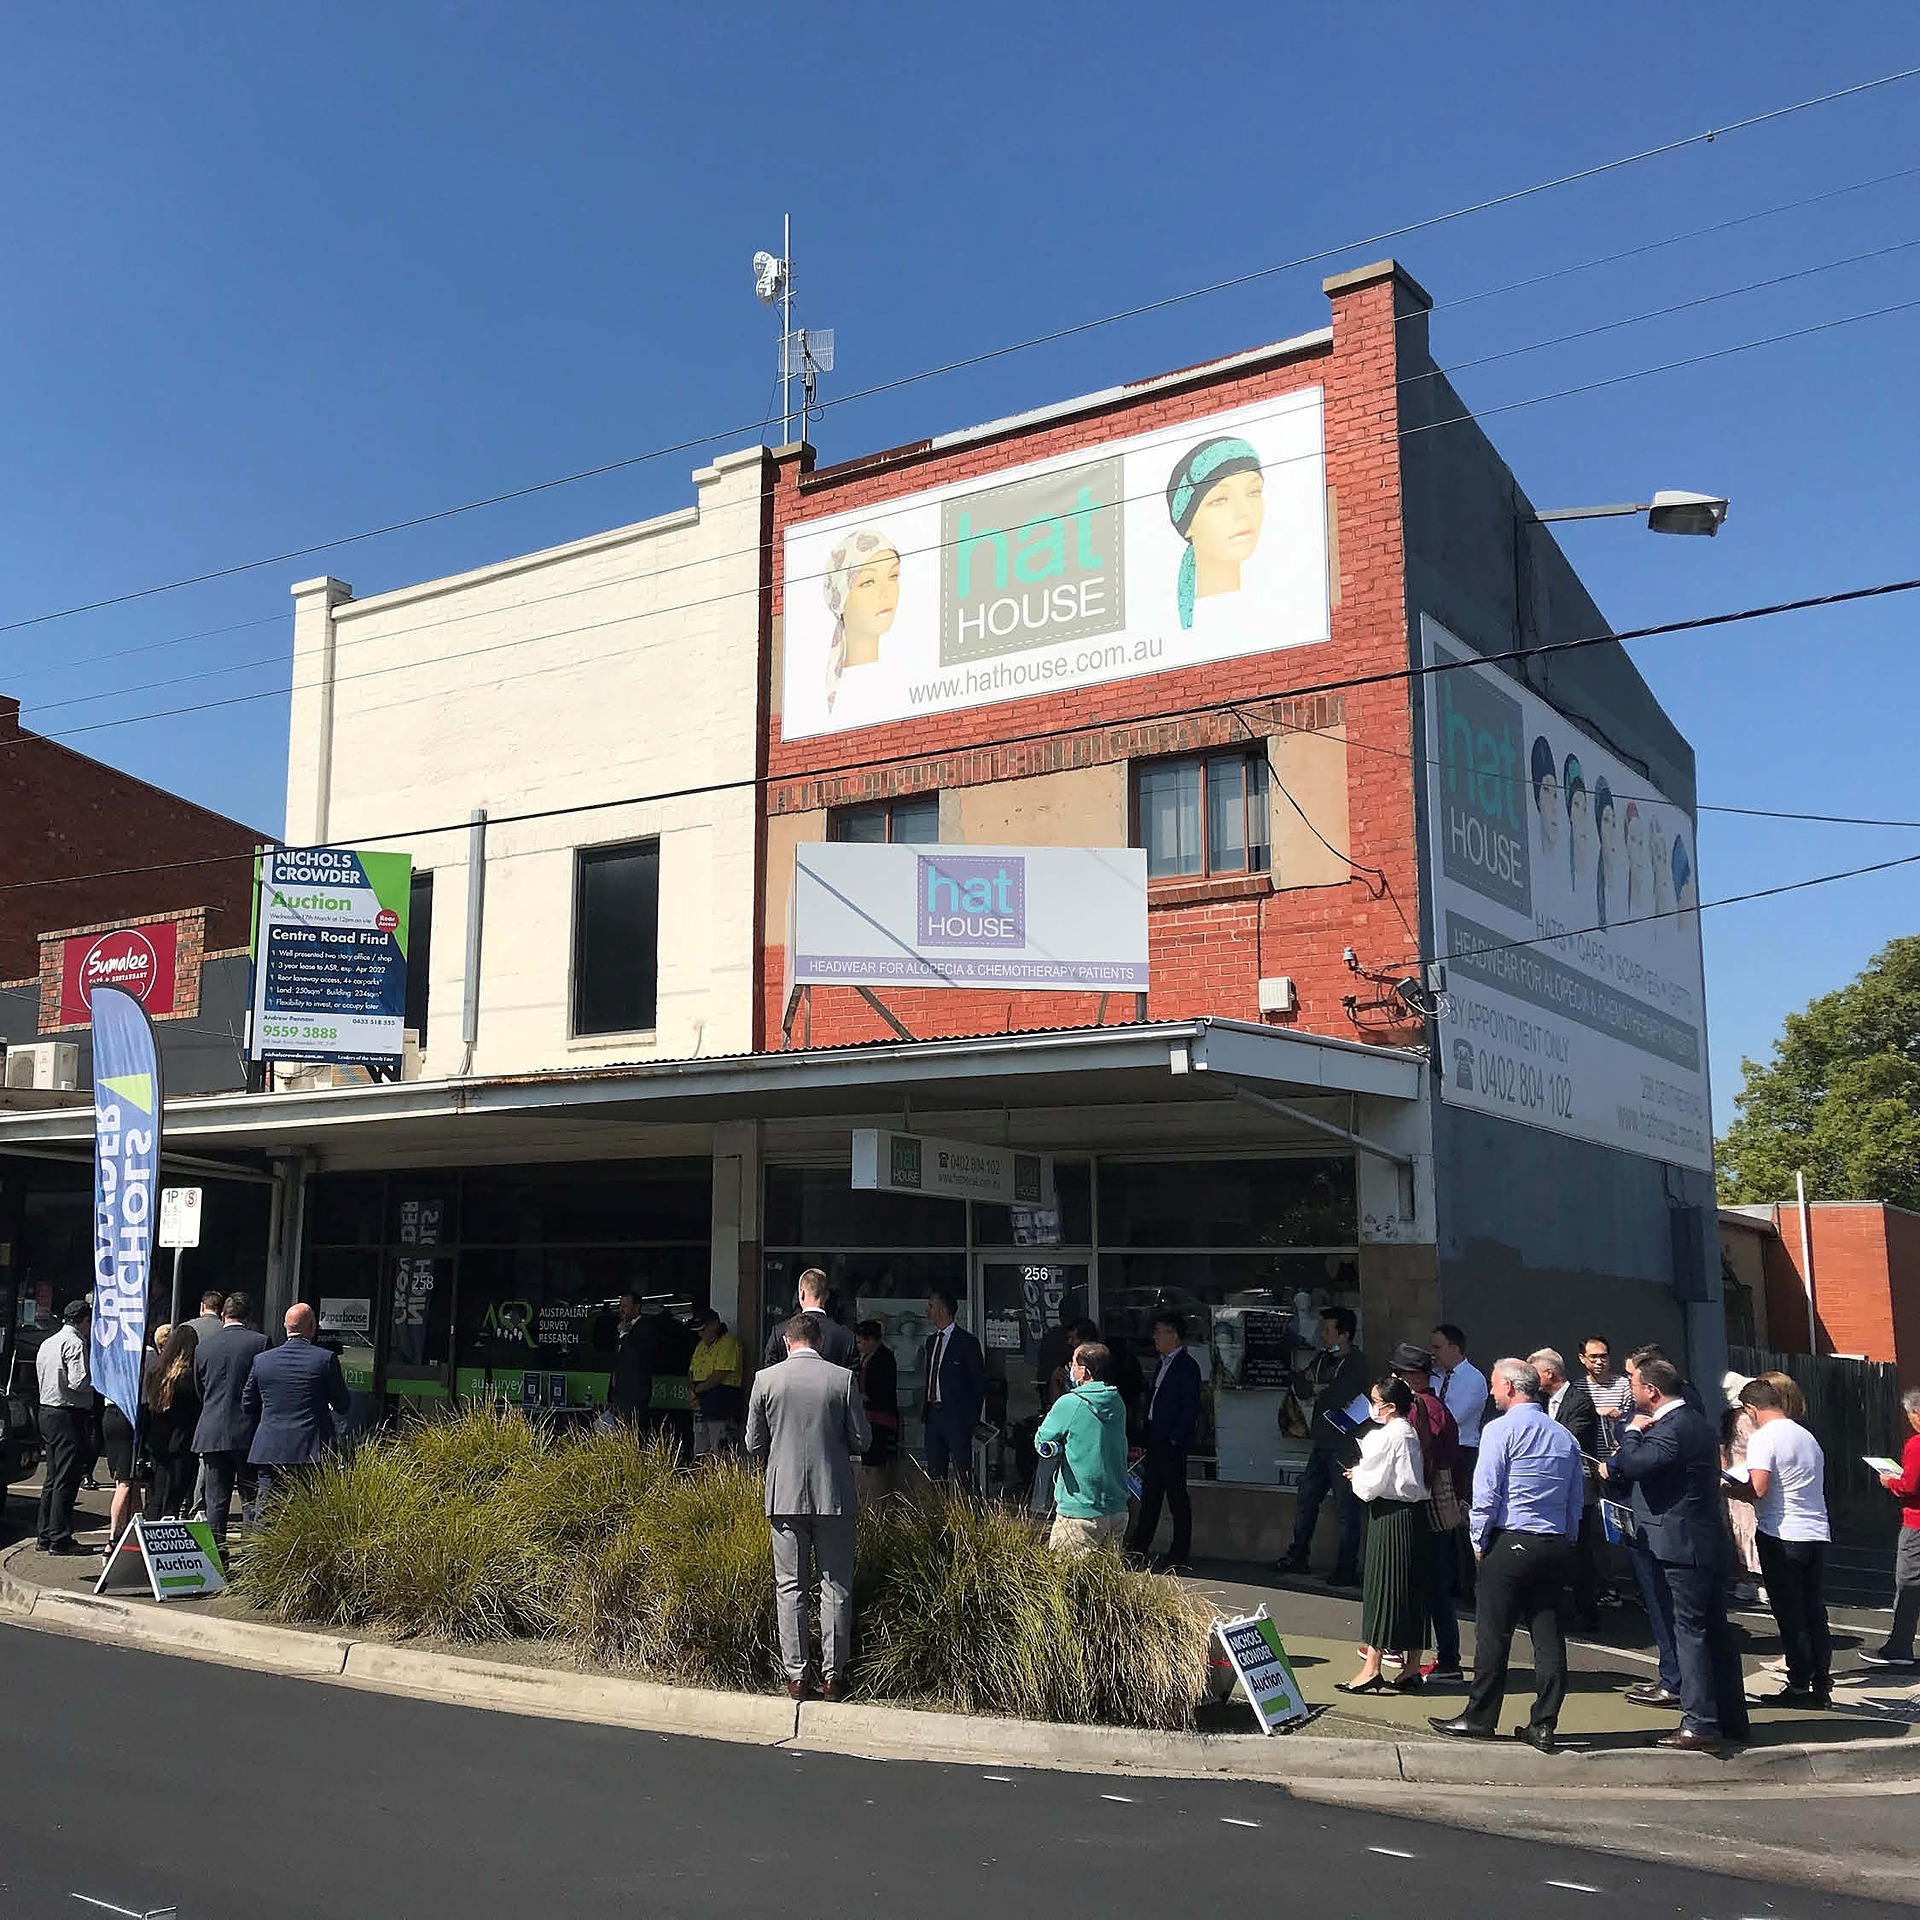 Bentleigh shop, Centre of attention come Auction day!